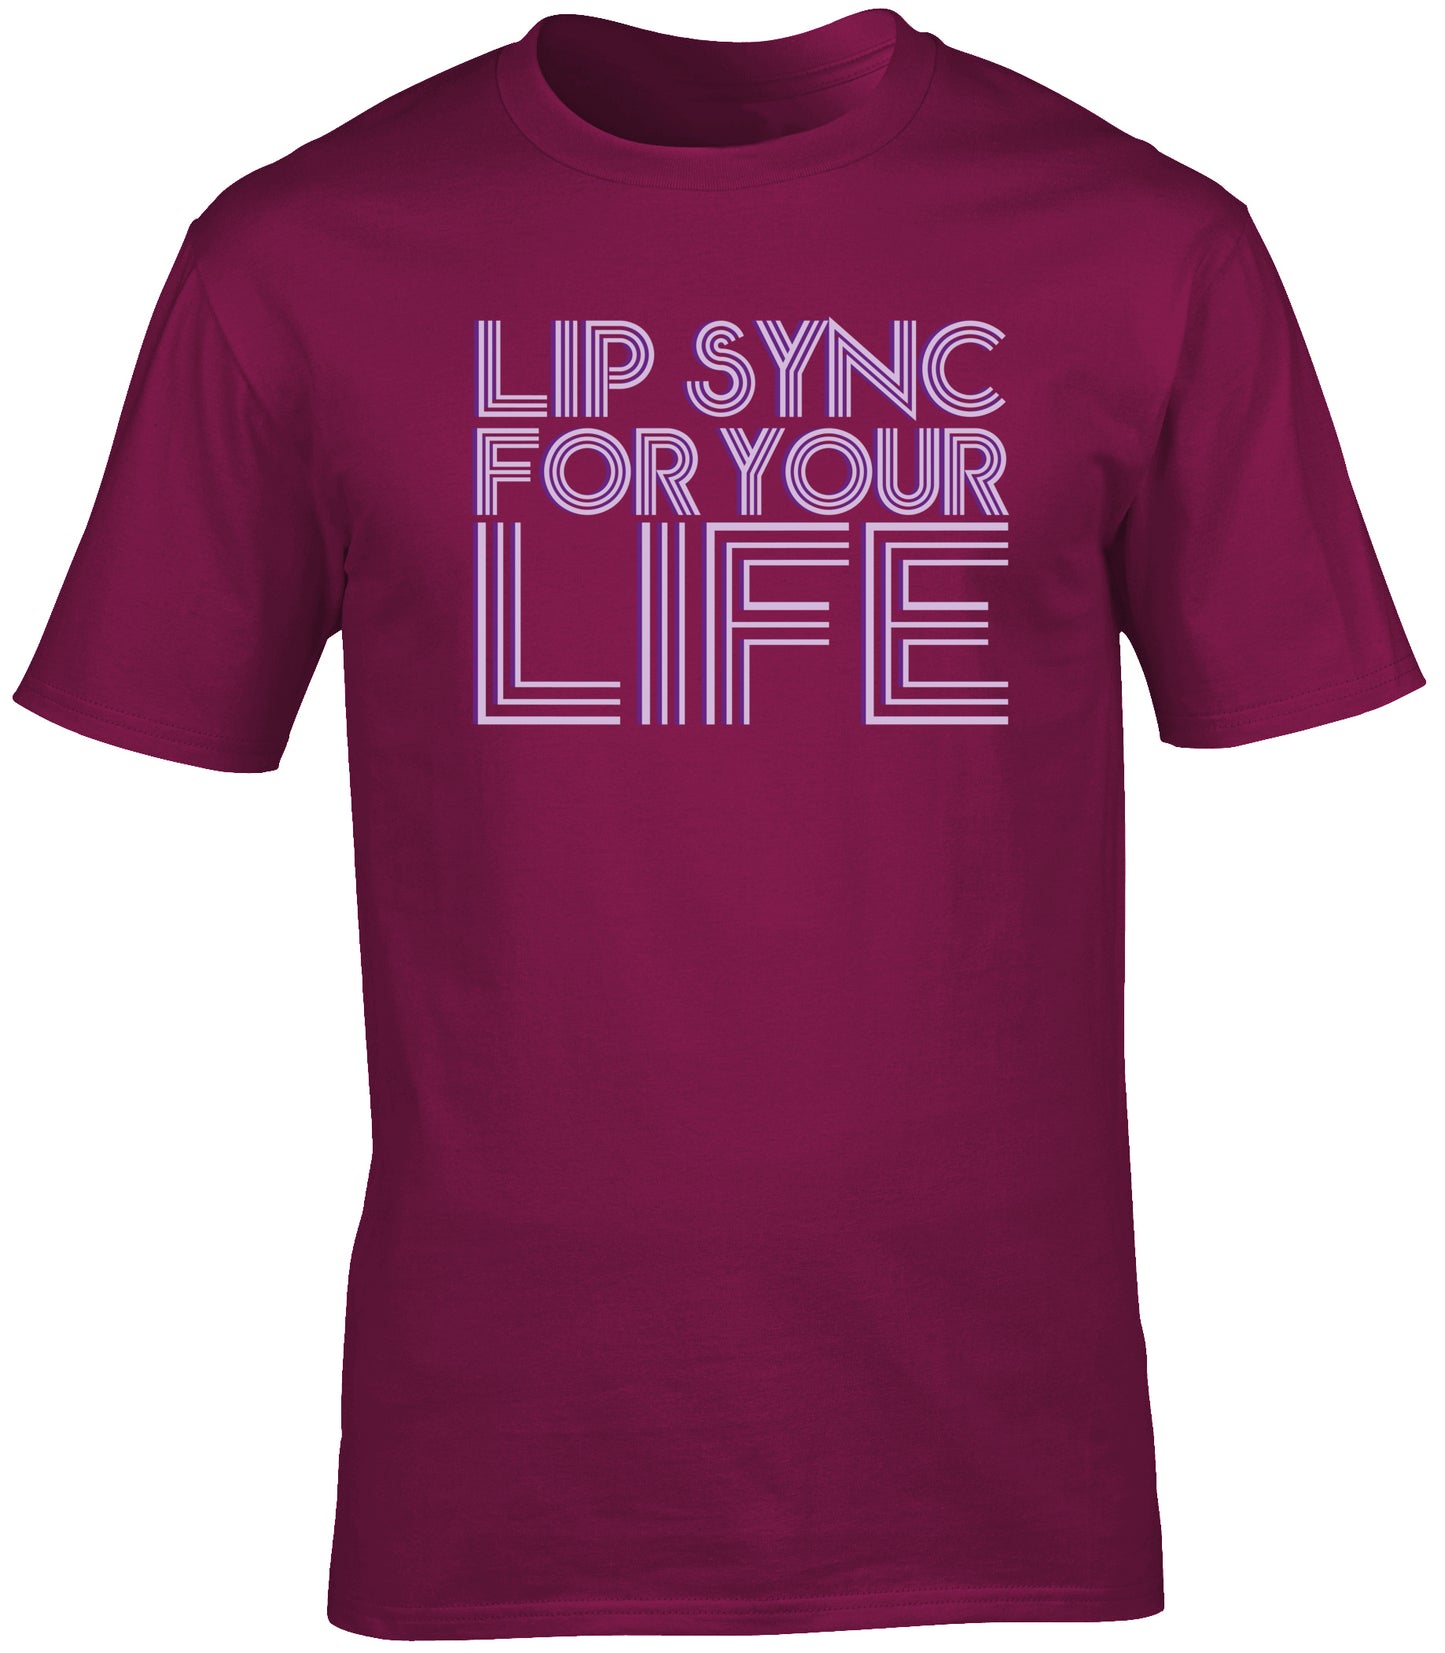 Lip sync for your life unisex t-shirt